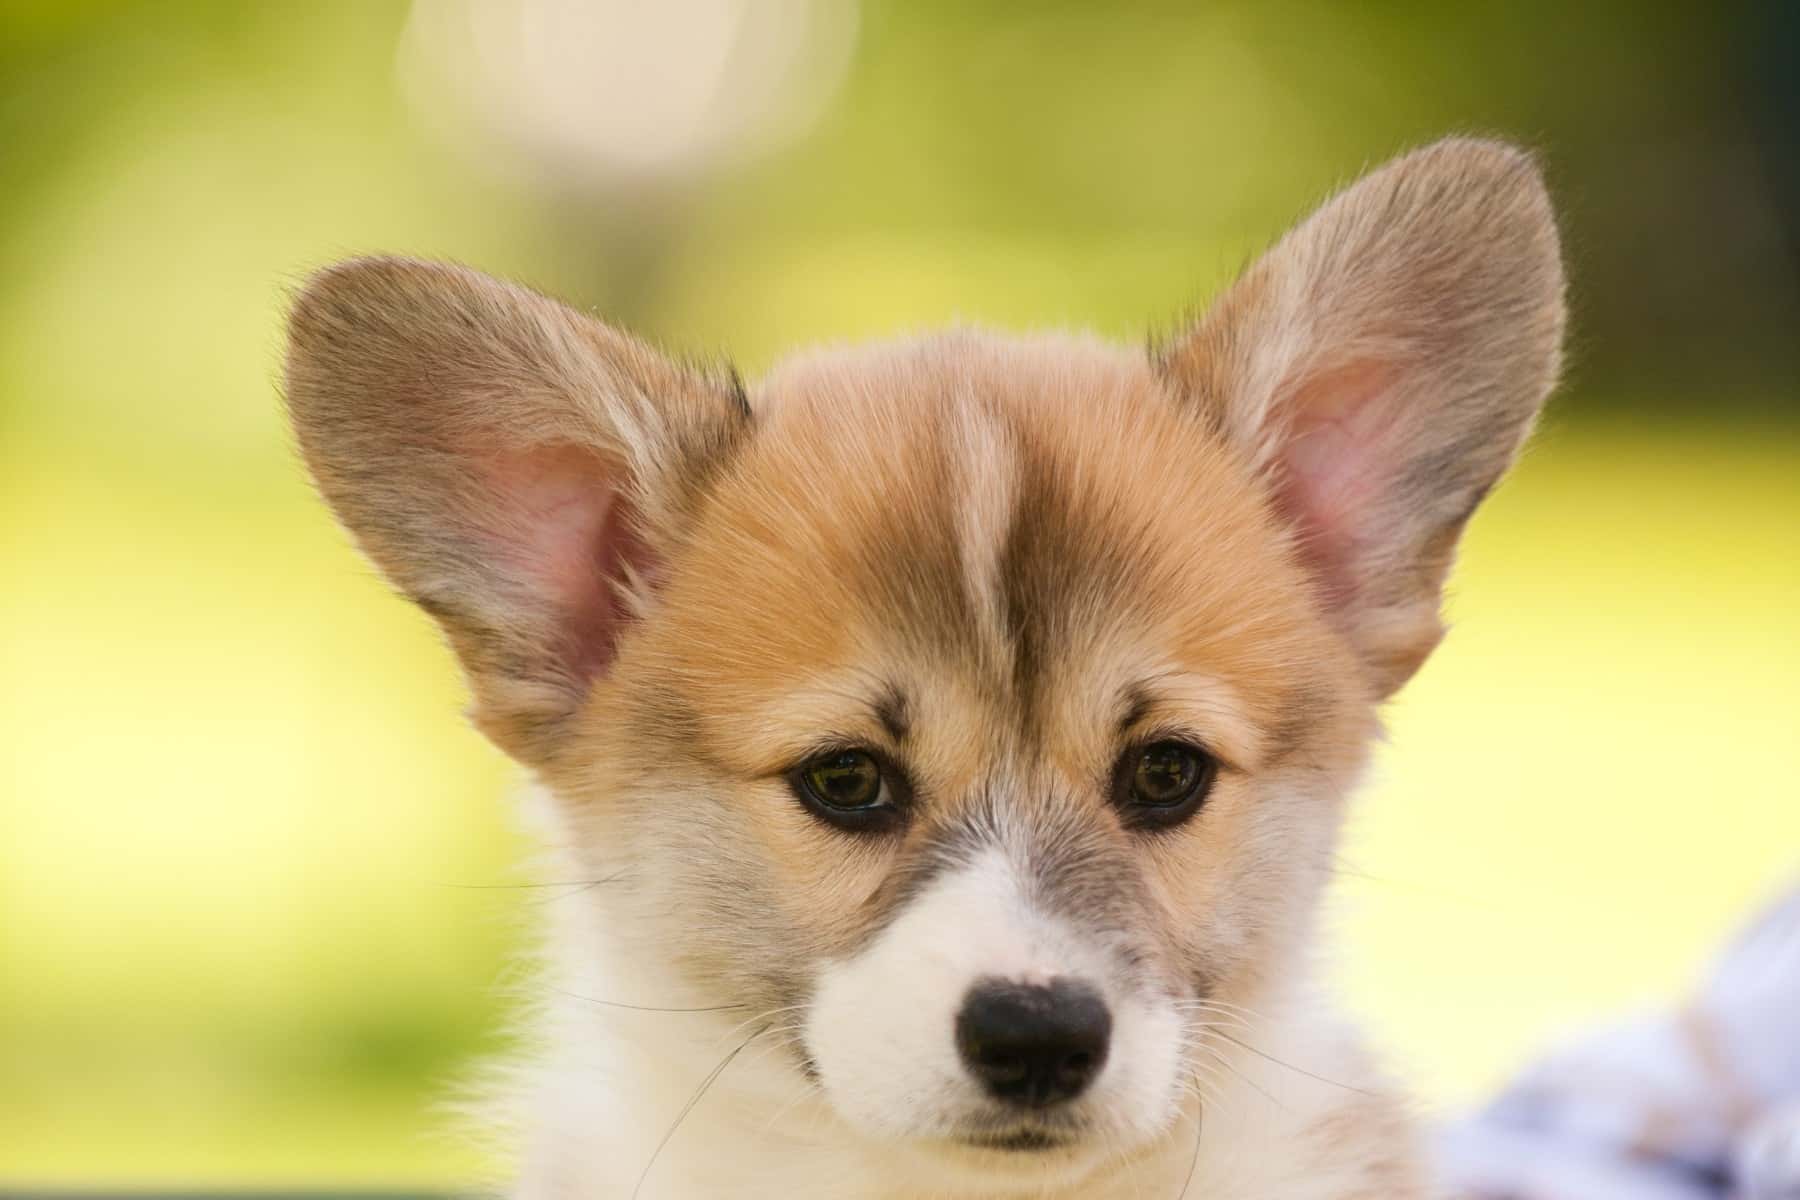 Corgis have whiskers on their face and you can see them close-up on this corgi puppy. Yay, corgi whiskers!